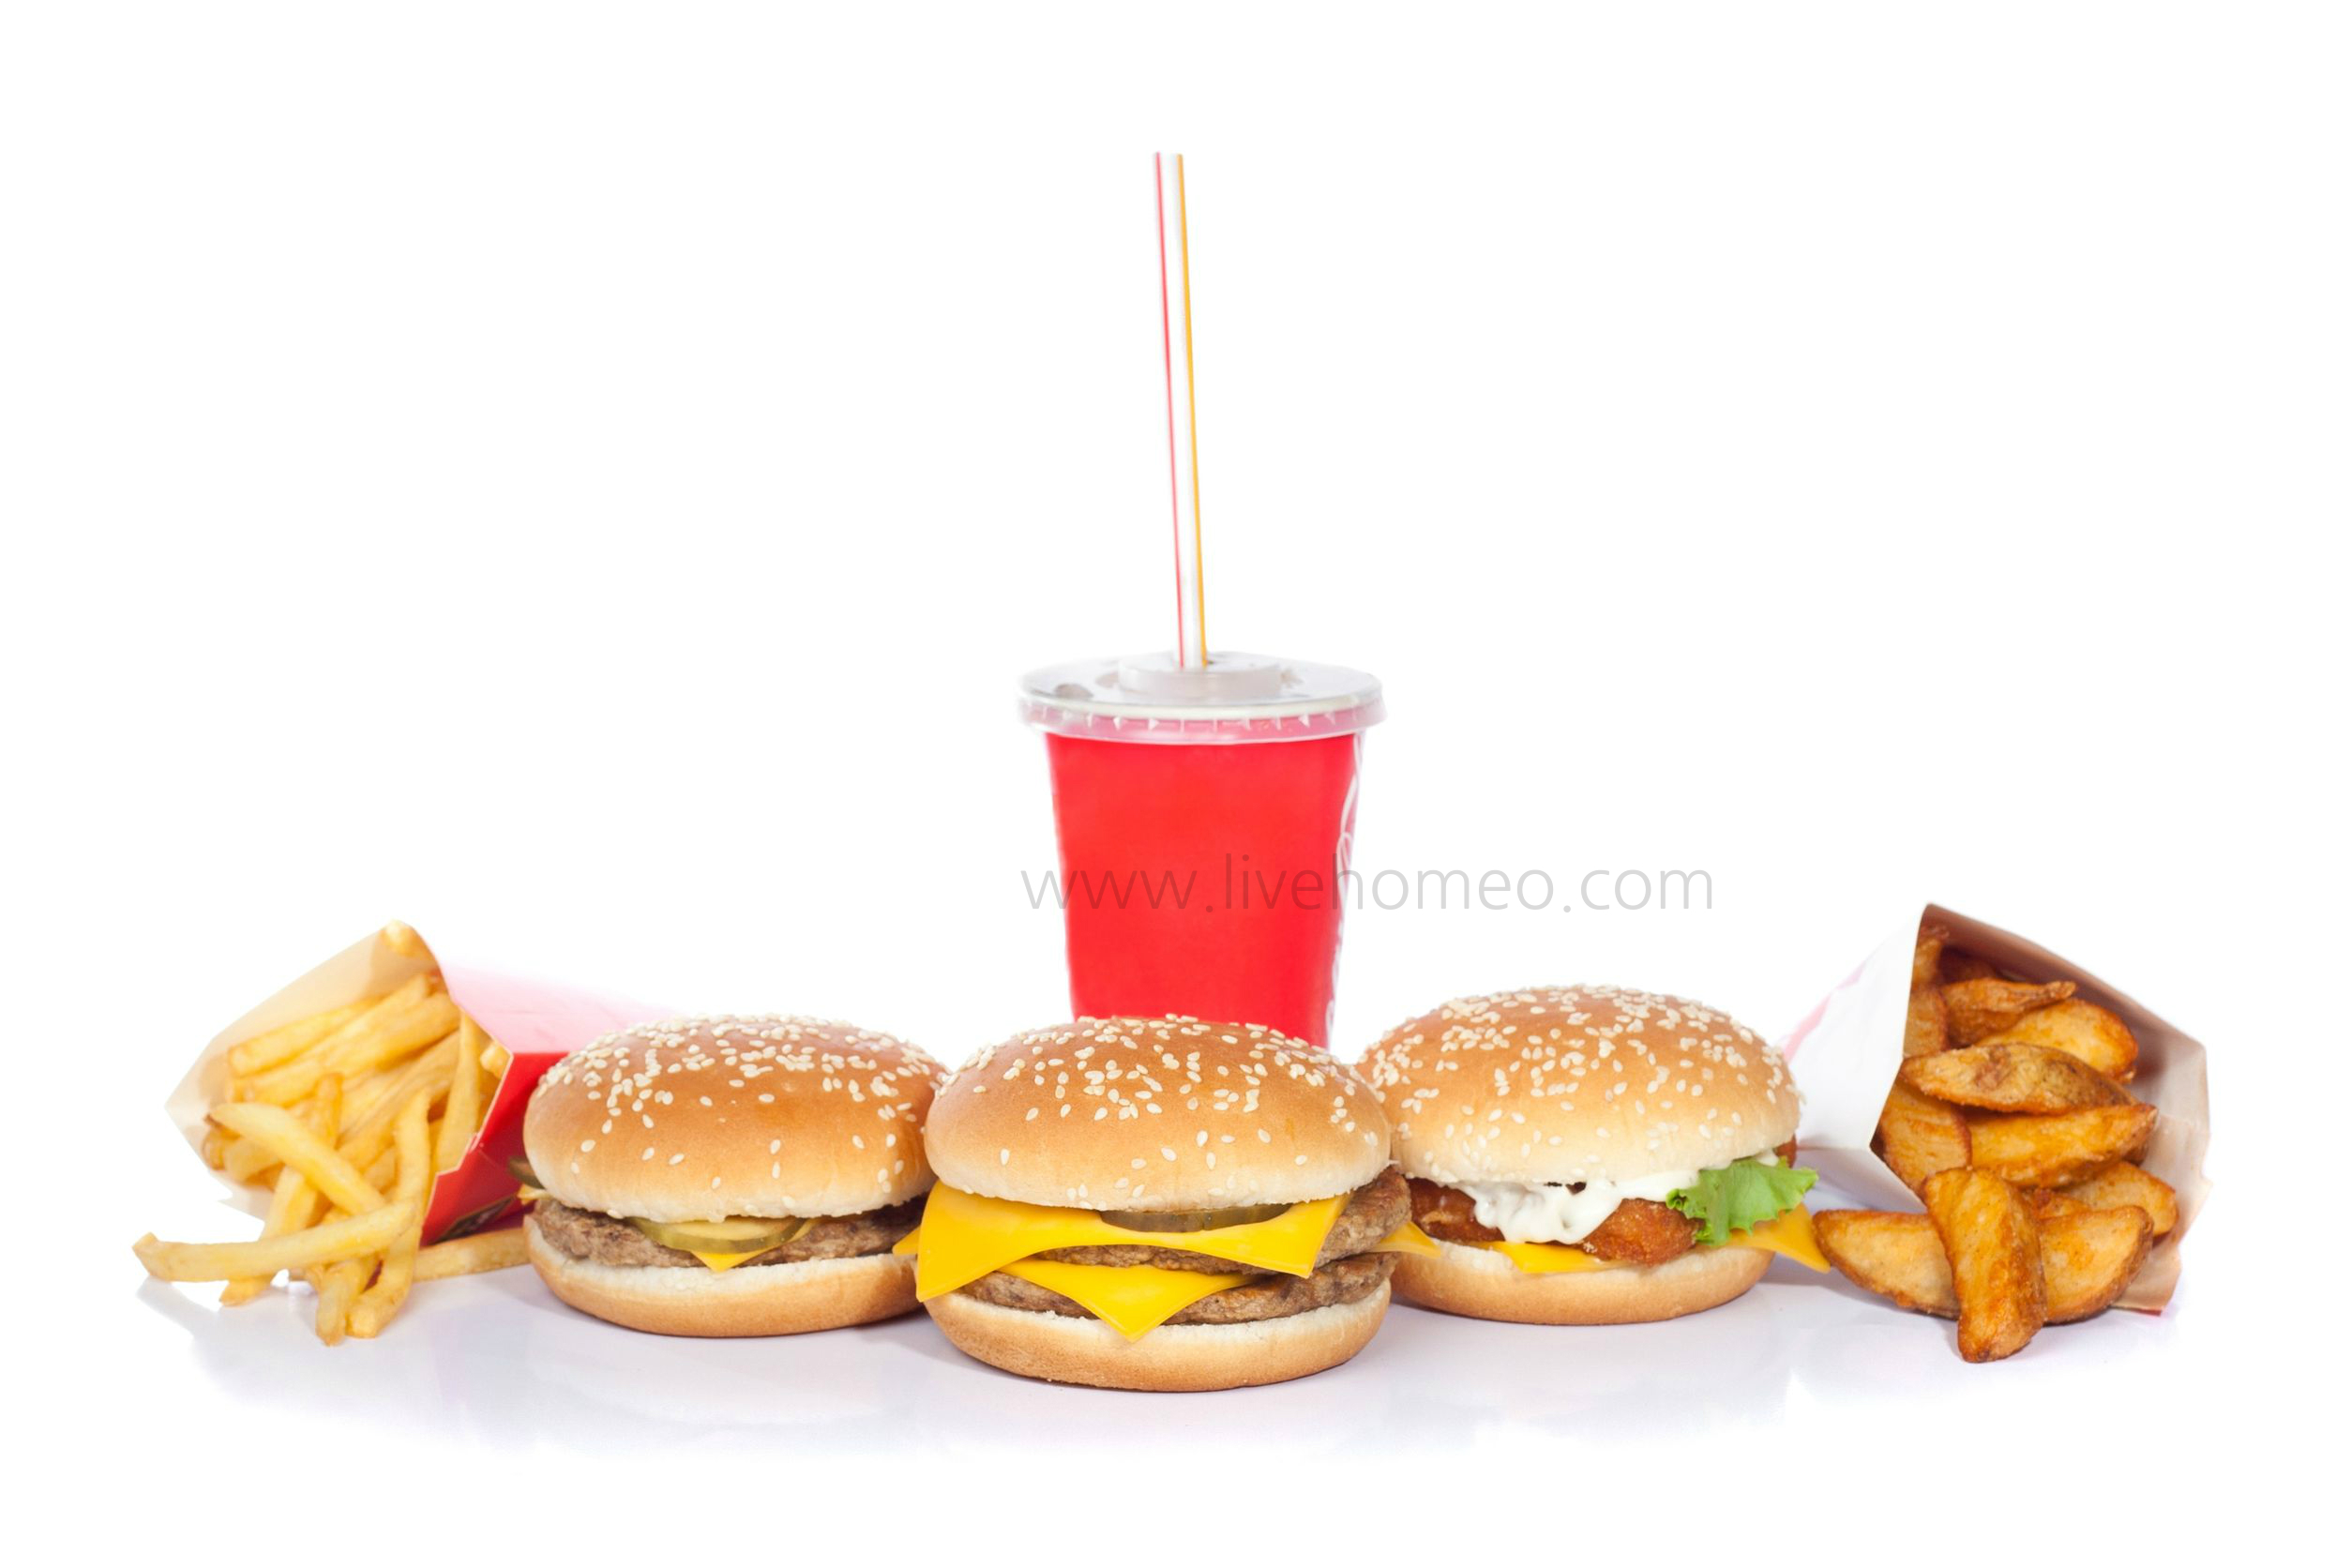 Consequences of processed foods on our health